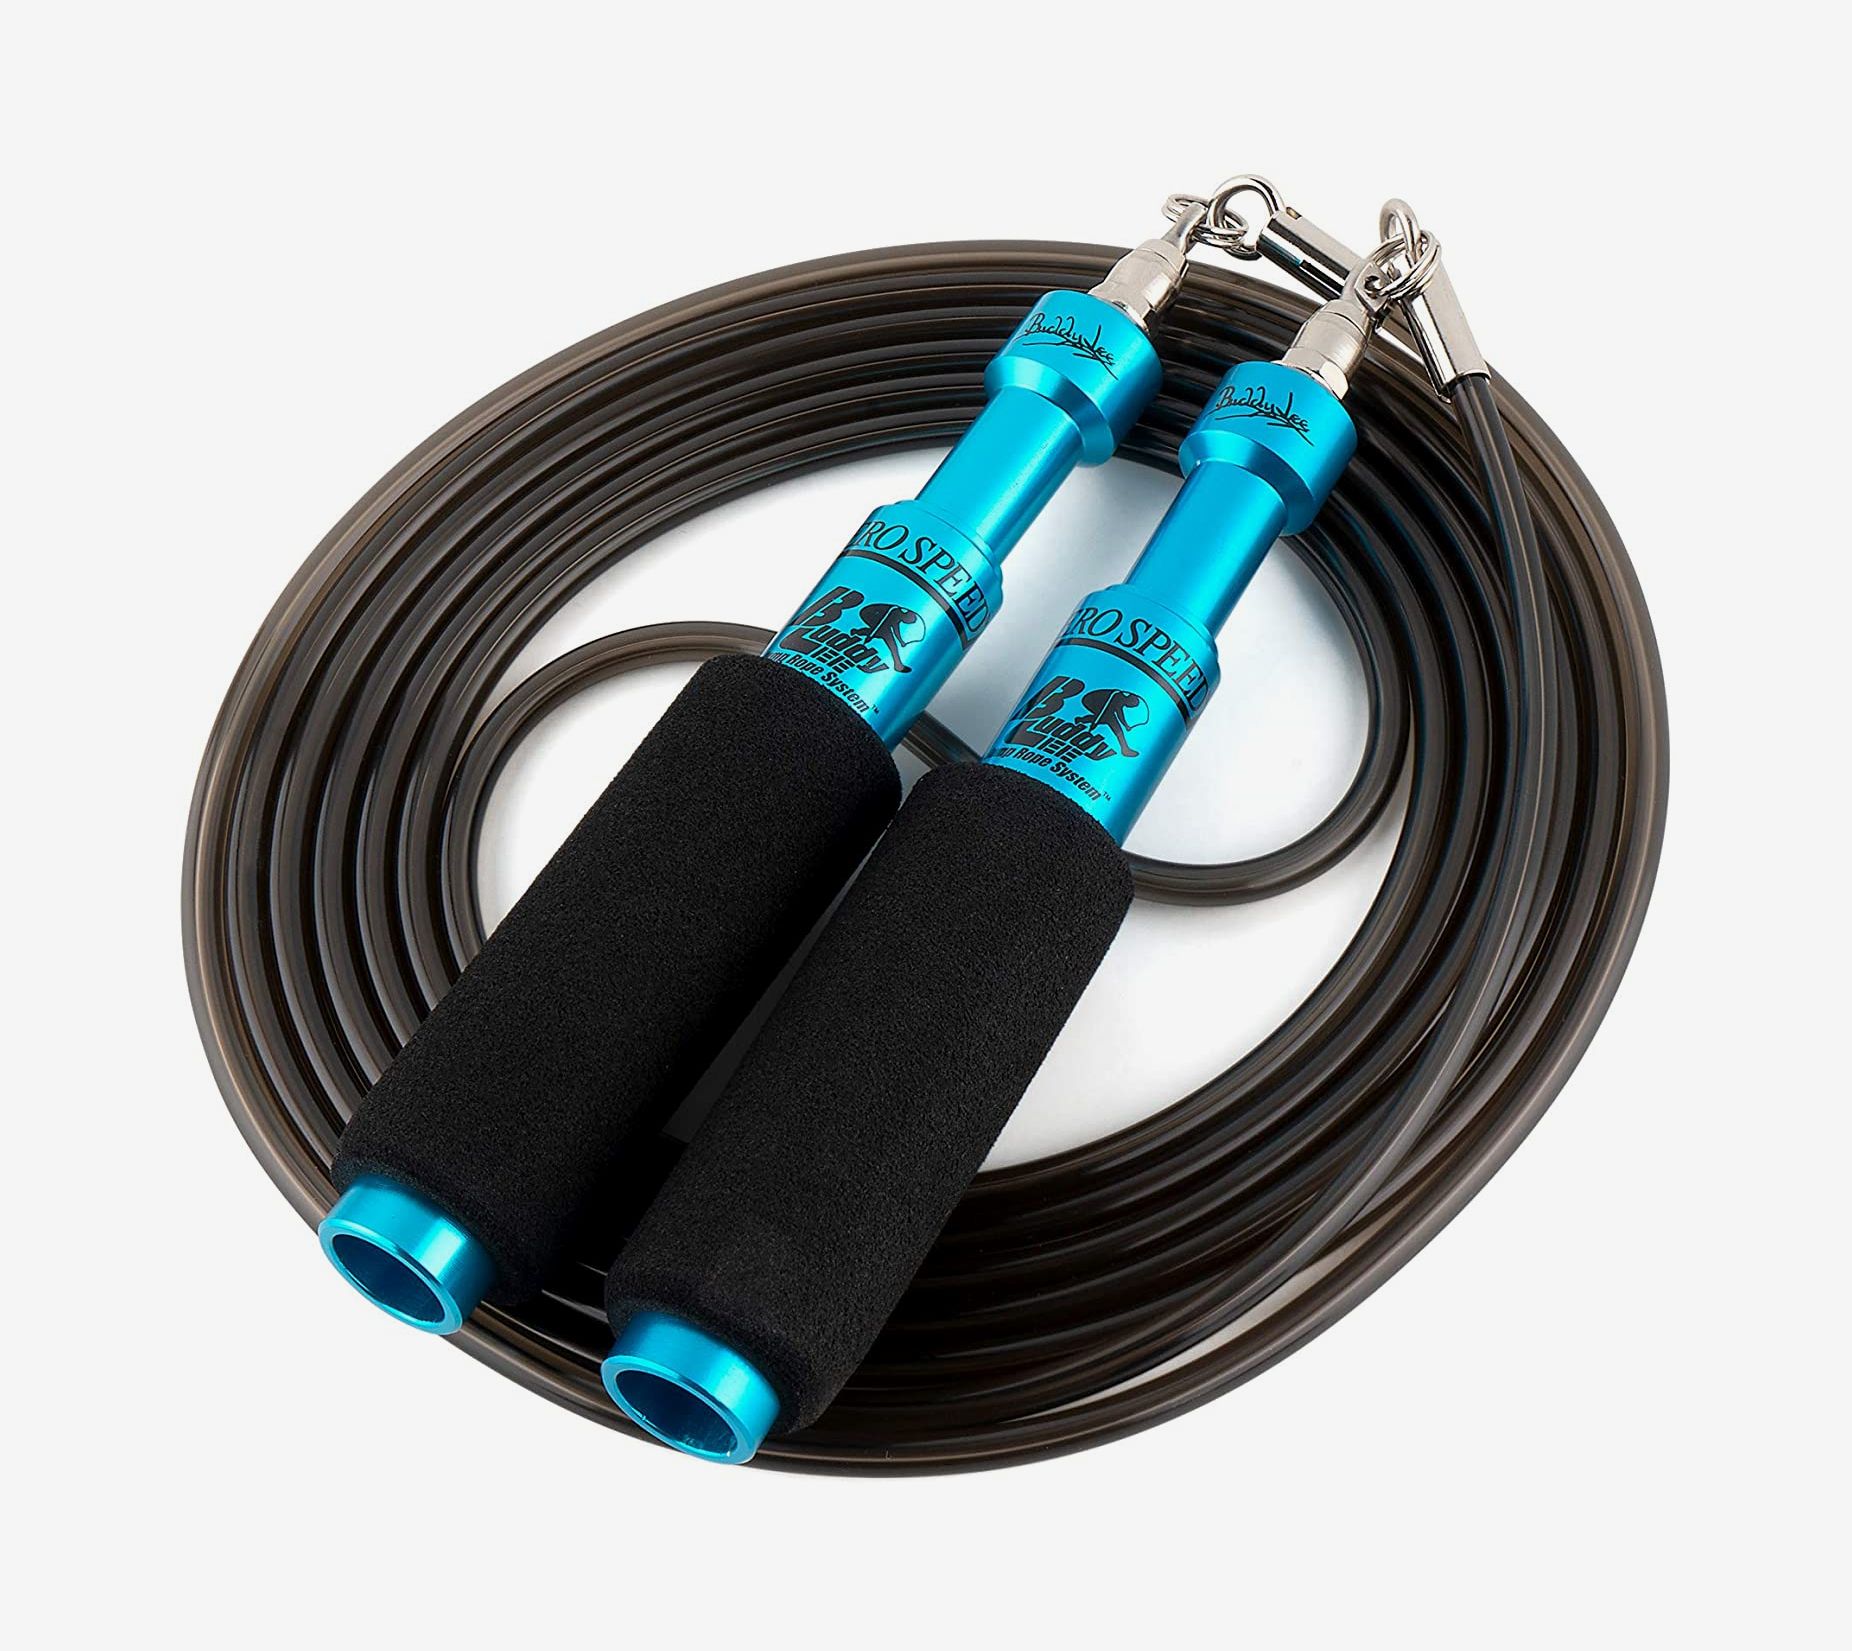 FORUU 2020 New Adjustable Jump Rope for Adult Kids Beginners Portable Durable Exercise Fitness Skipping Rope for Sale Workout at Home Best Jump Rope for Cardio Weight Loss Best Gift Under 10 Dollar 